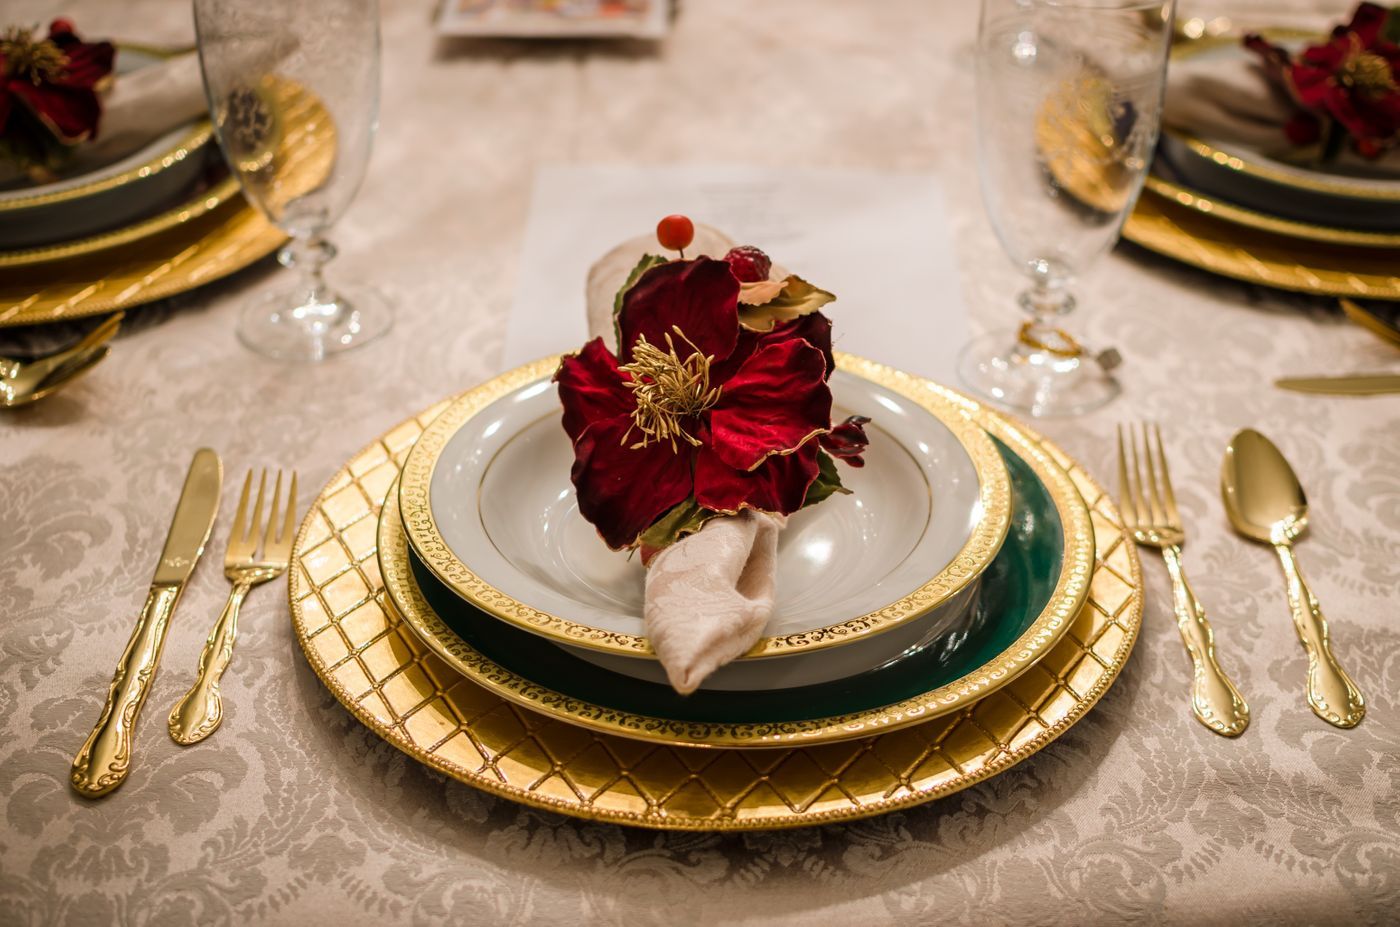 Formal place setting at a formal dinner